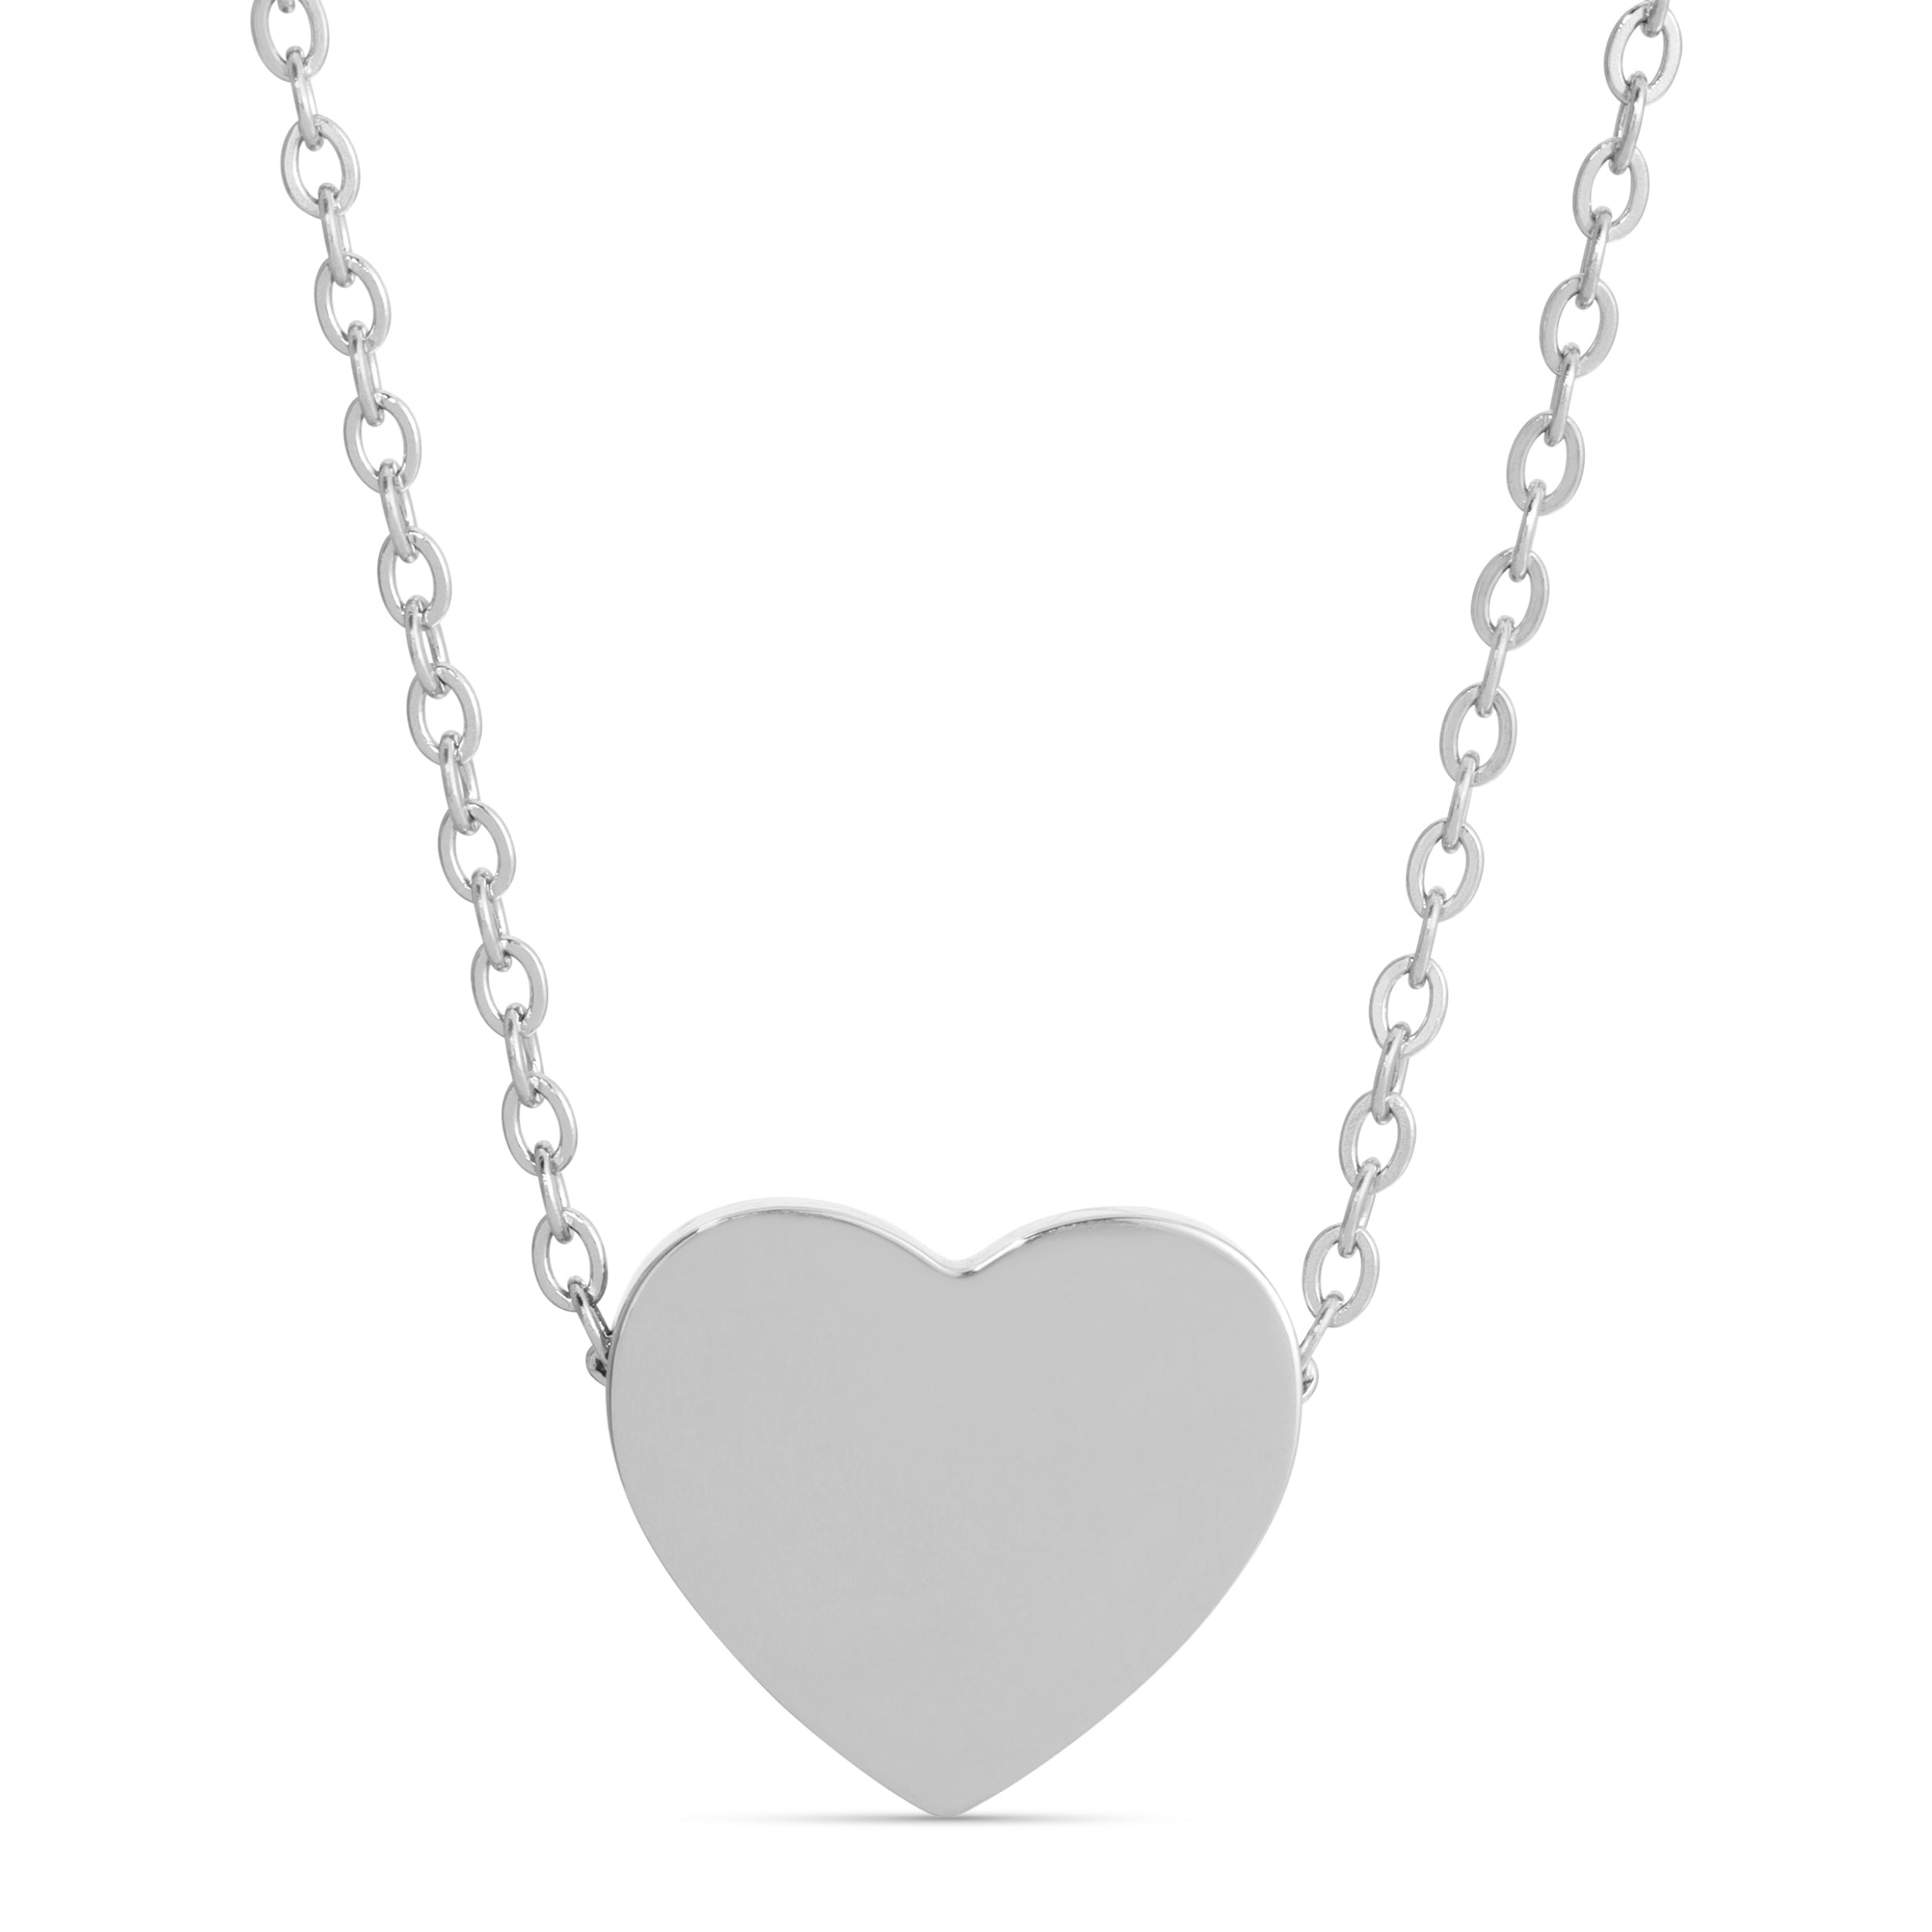 Stainless Steel Engravable Heart Pendant Necklace